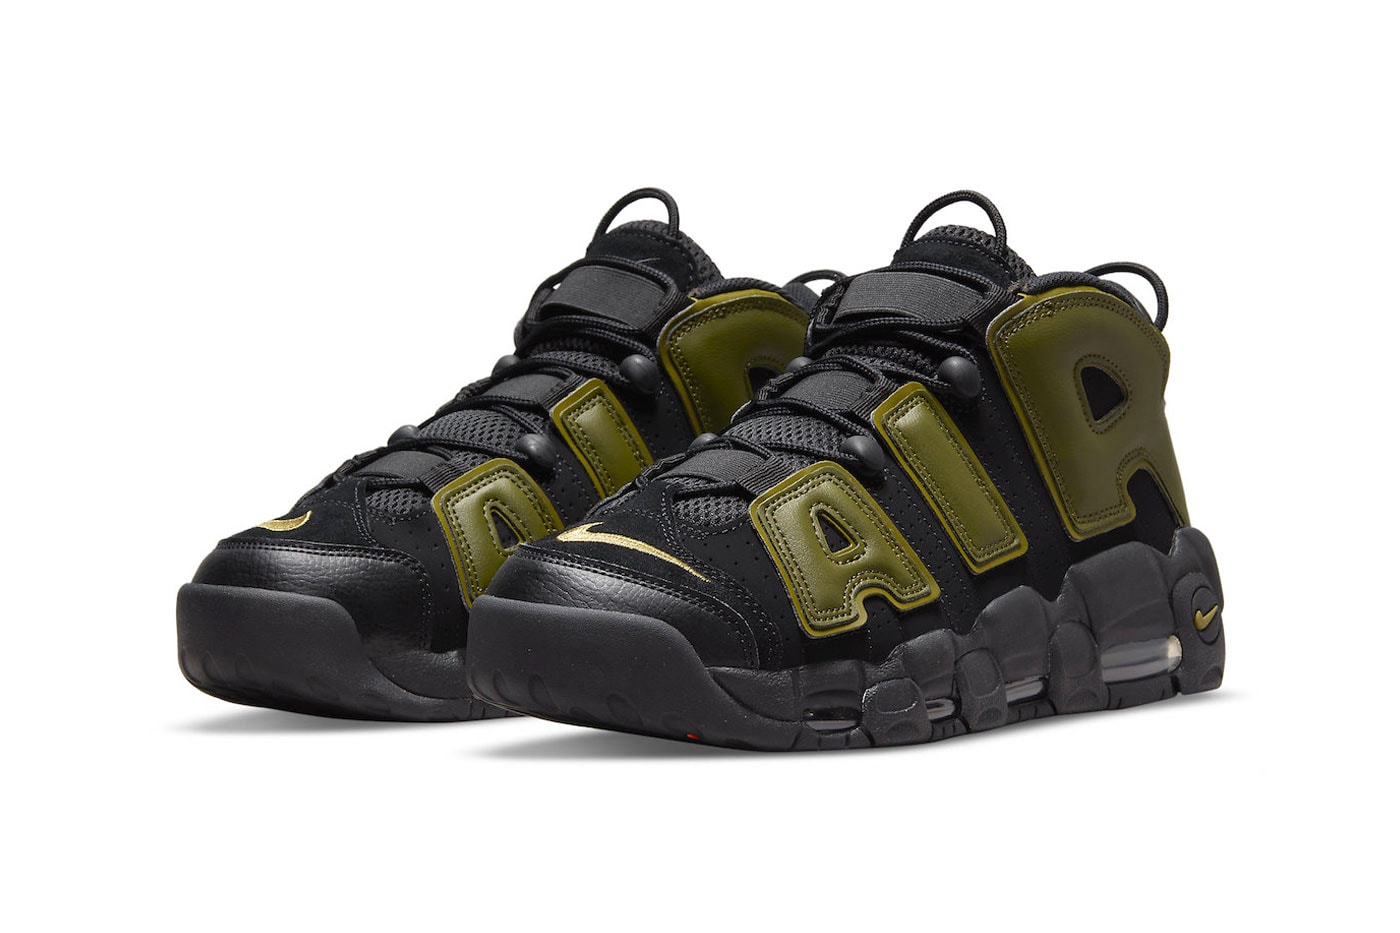 New Nike Air More Uptempo "Rough Green" Is Coming Soon DH8011-001 black green pilgrim army military garb nubuck leather